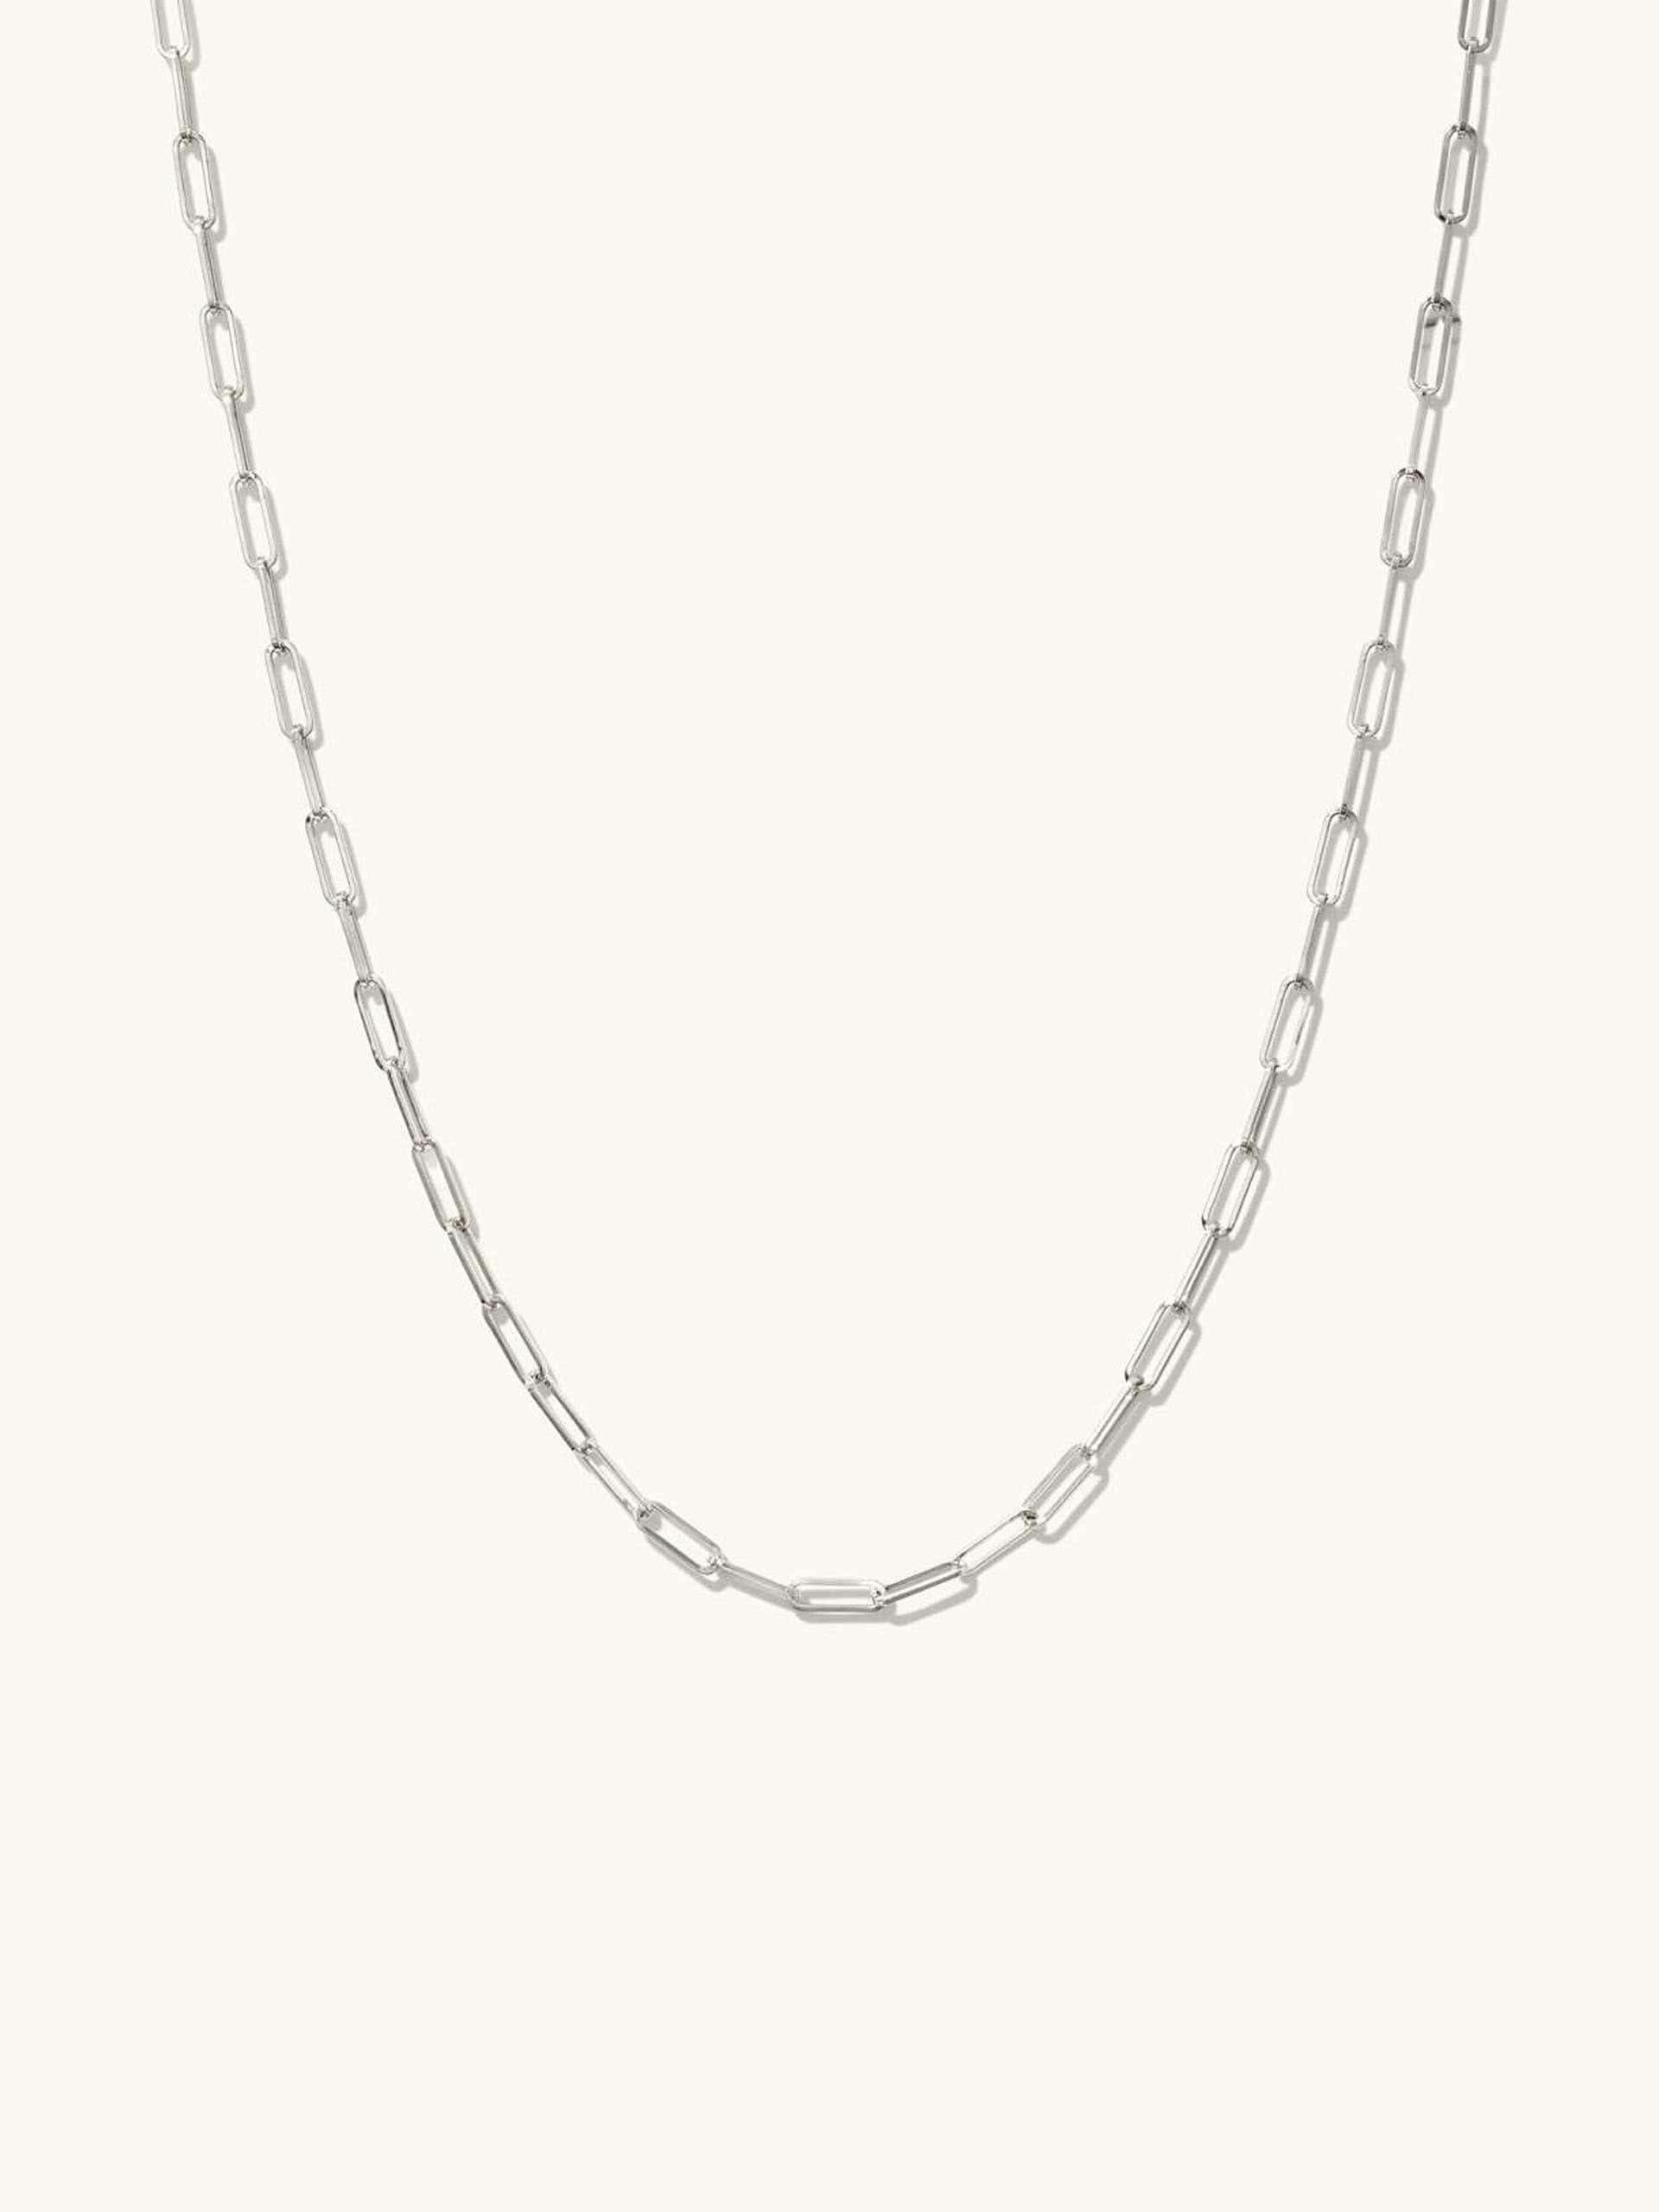 14kt white gold chain necklace